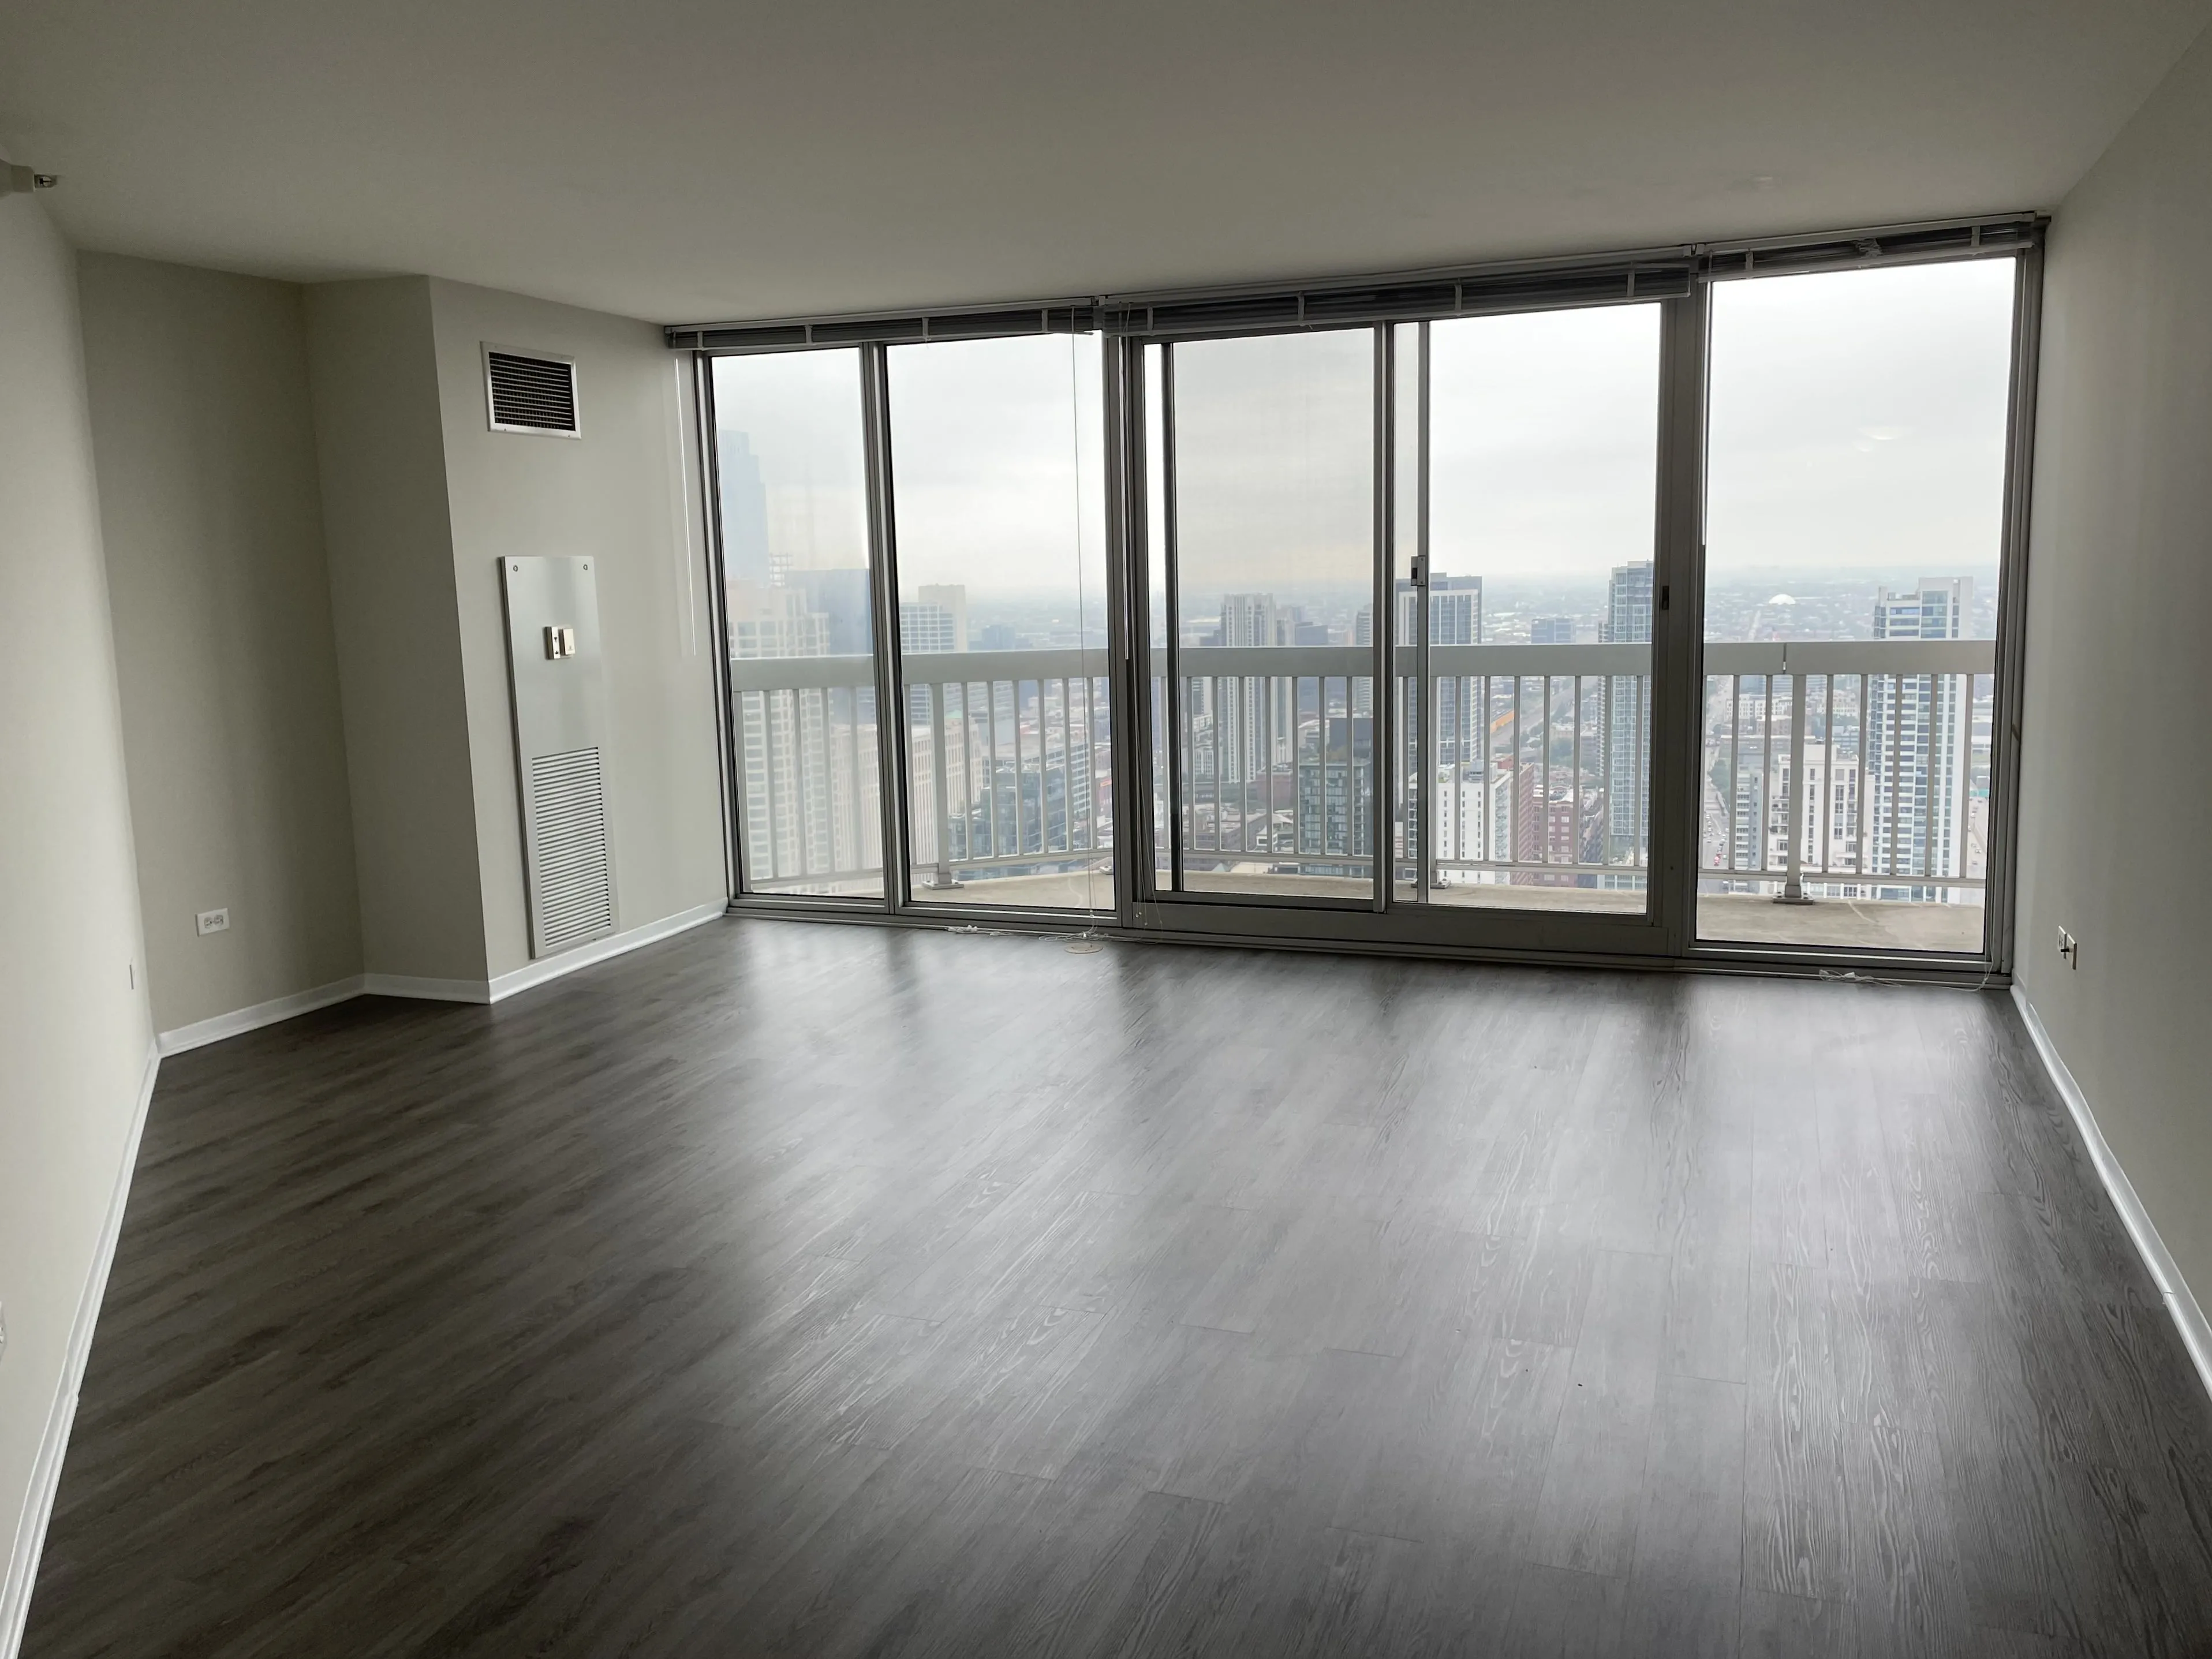 540 N STATE ST 60654-unit#3505-Chicago-IL